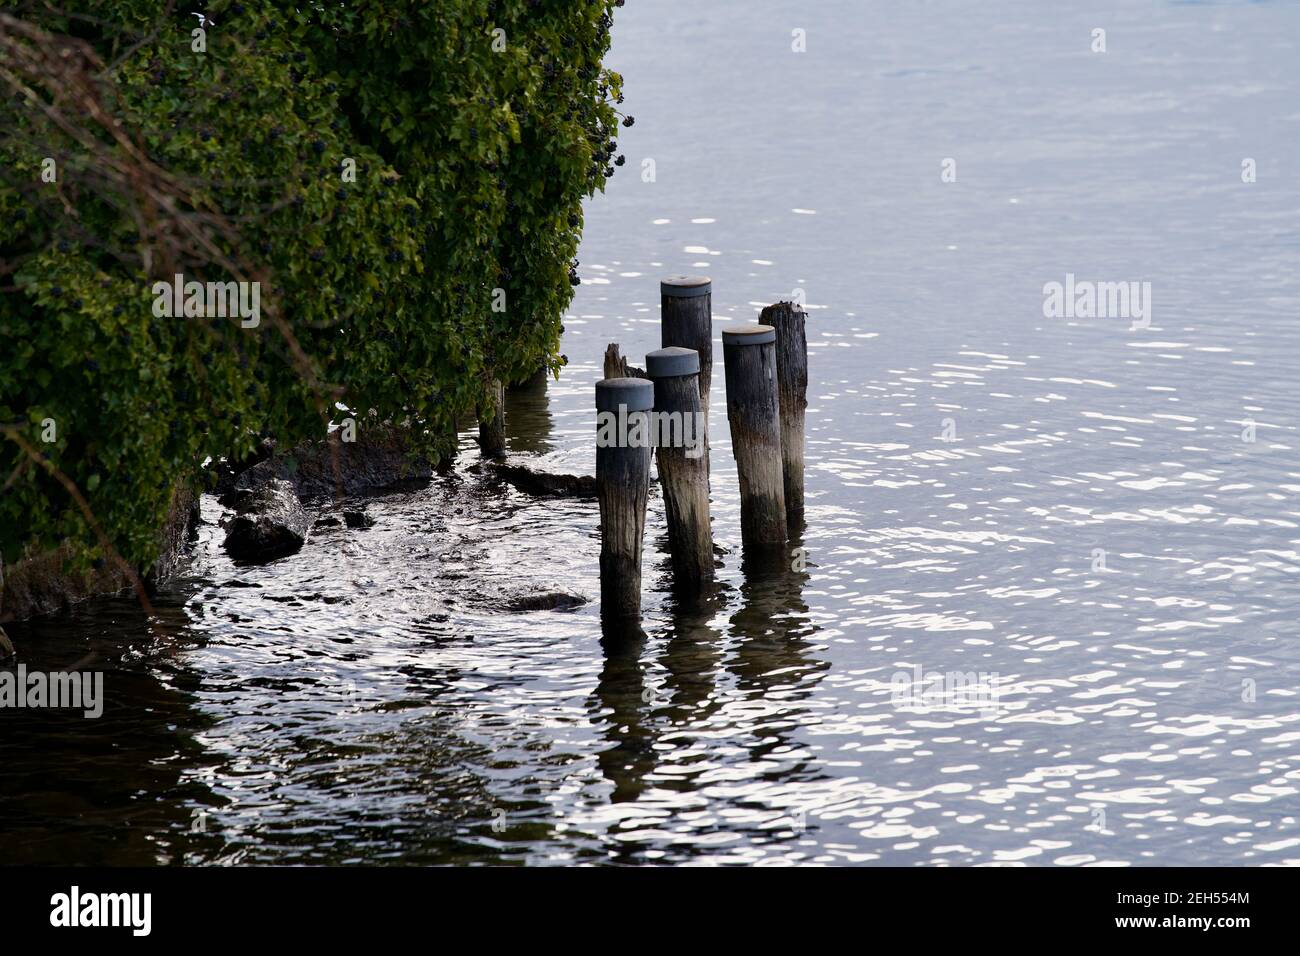 Border of lake of Zurich with wooden poles for fixation of boats ans ships. Stock Photo